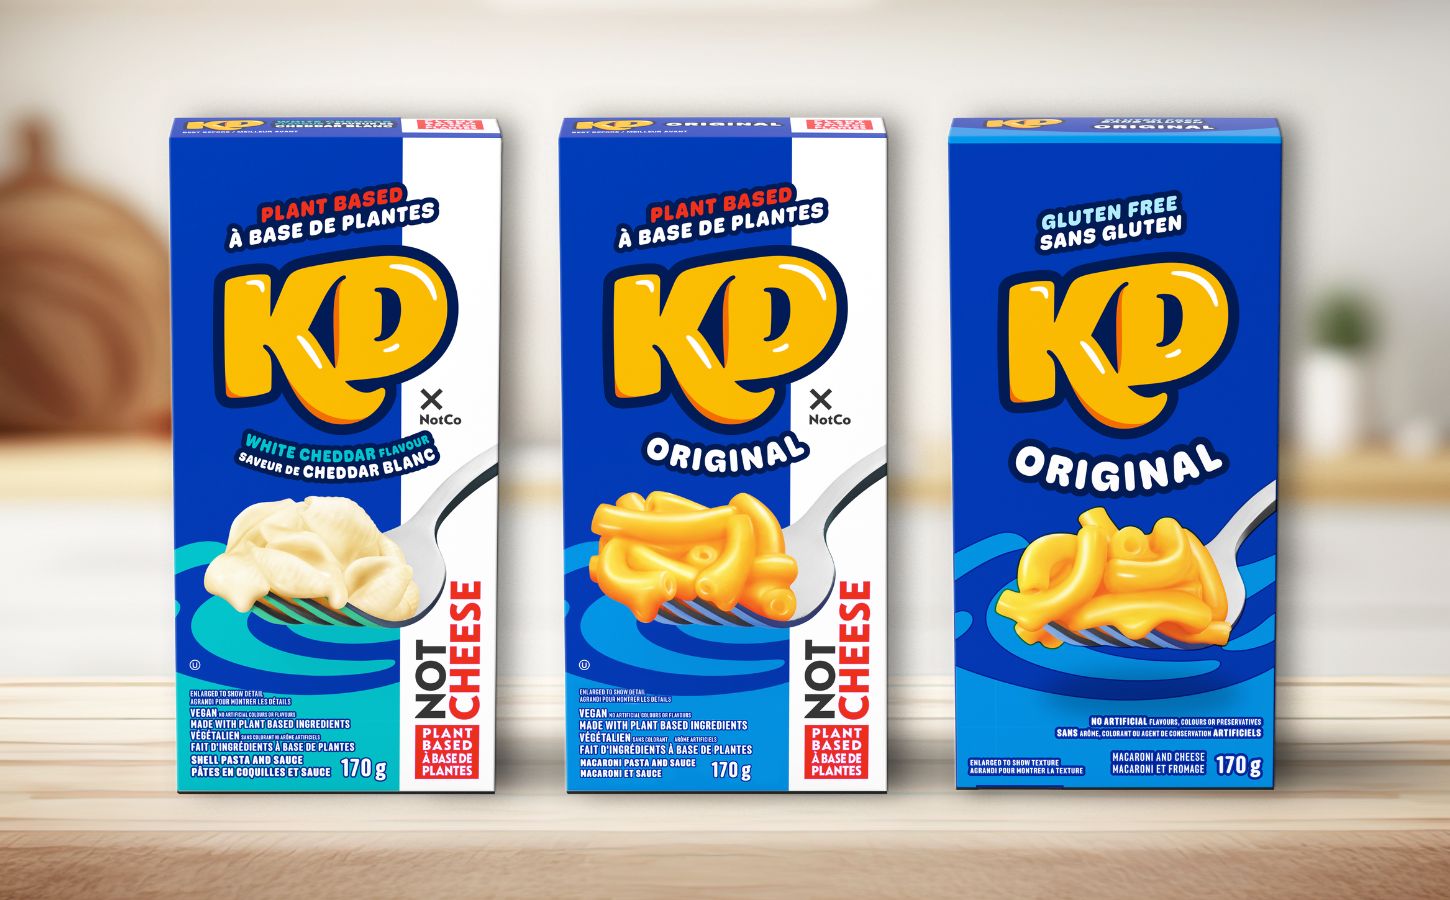 Dairy-free mac and cheese boxes from The Kraft Heinz Company